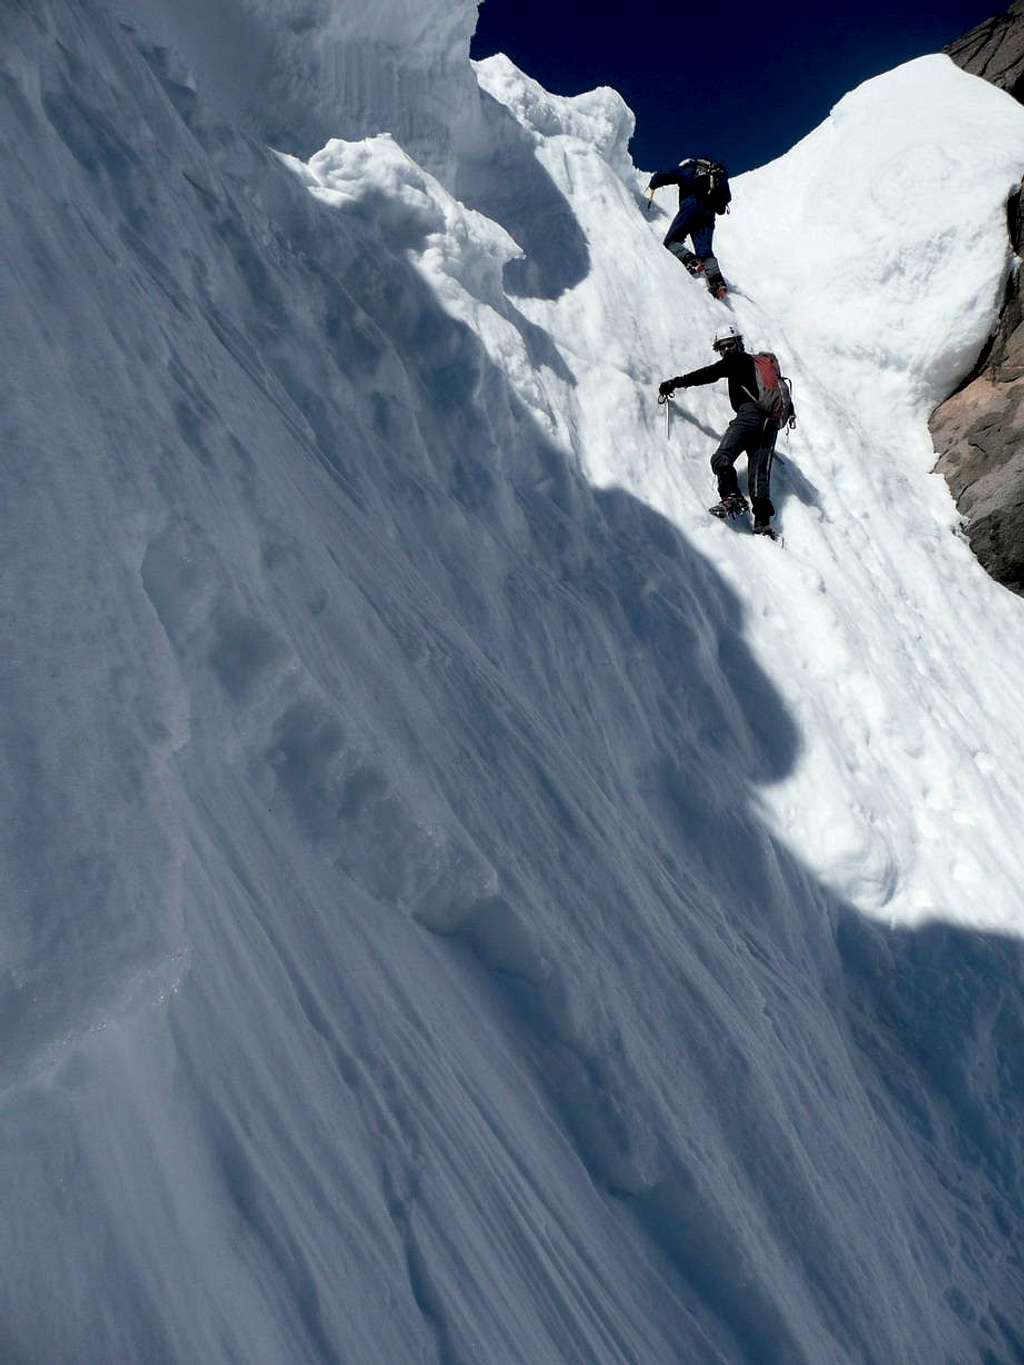 Exiting the couloir